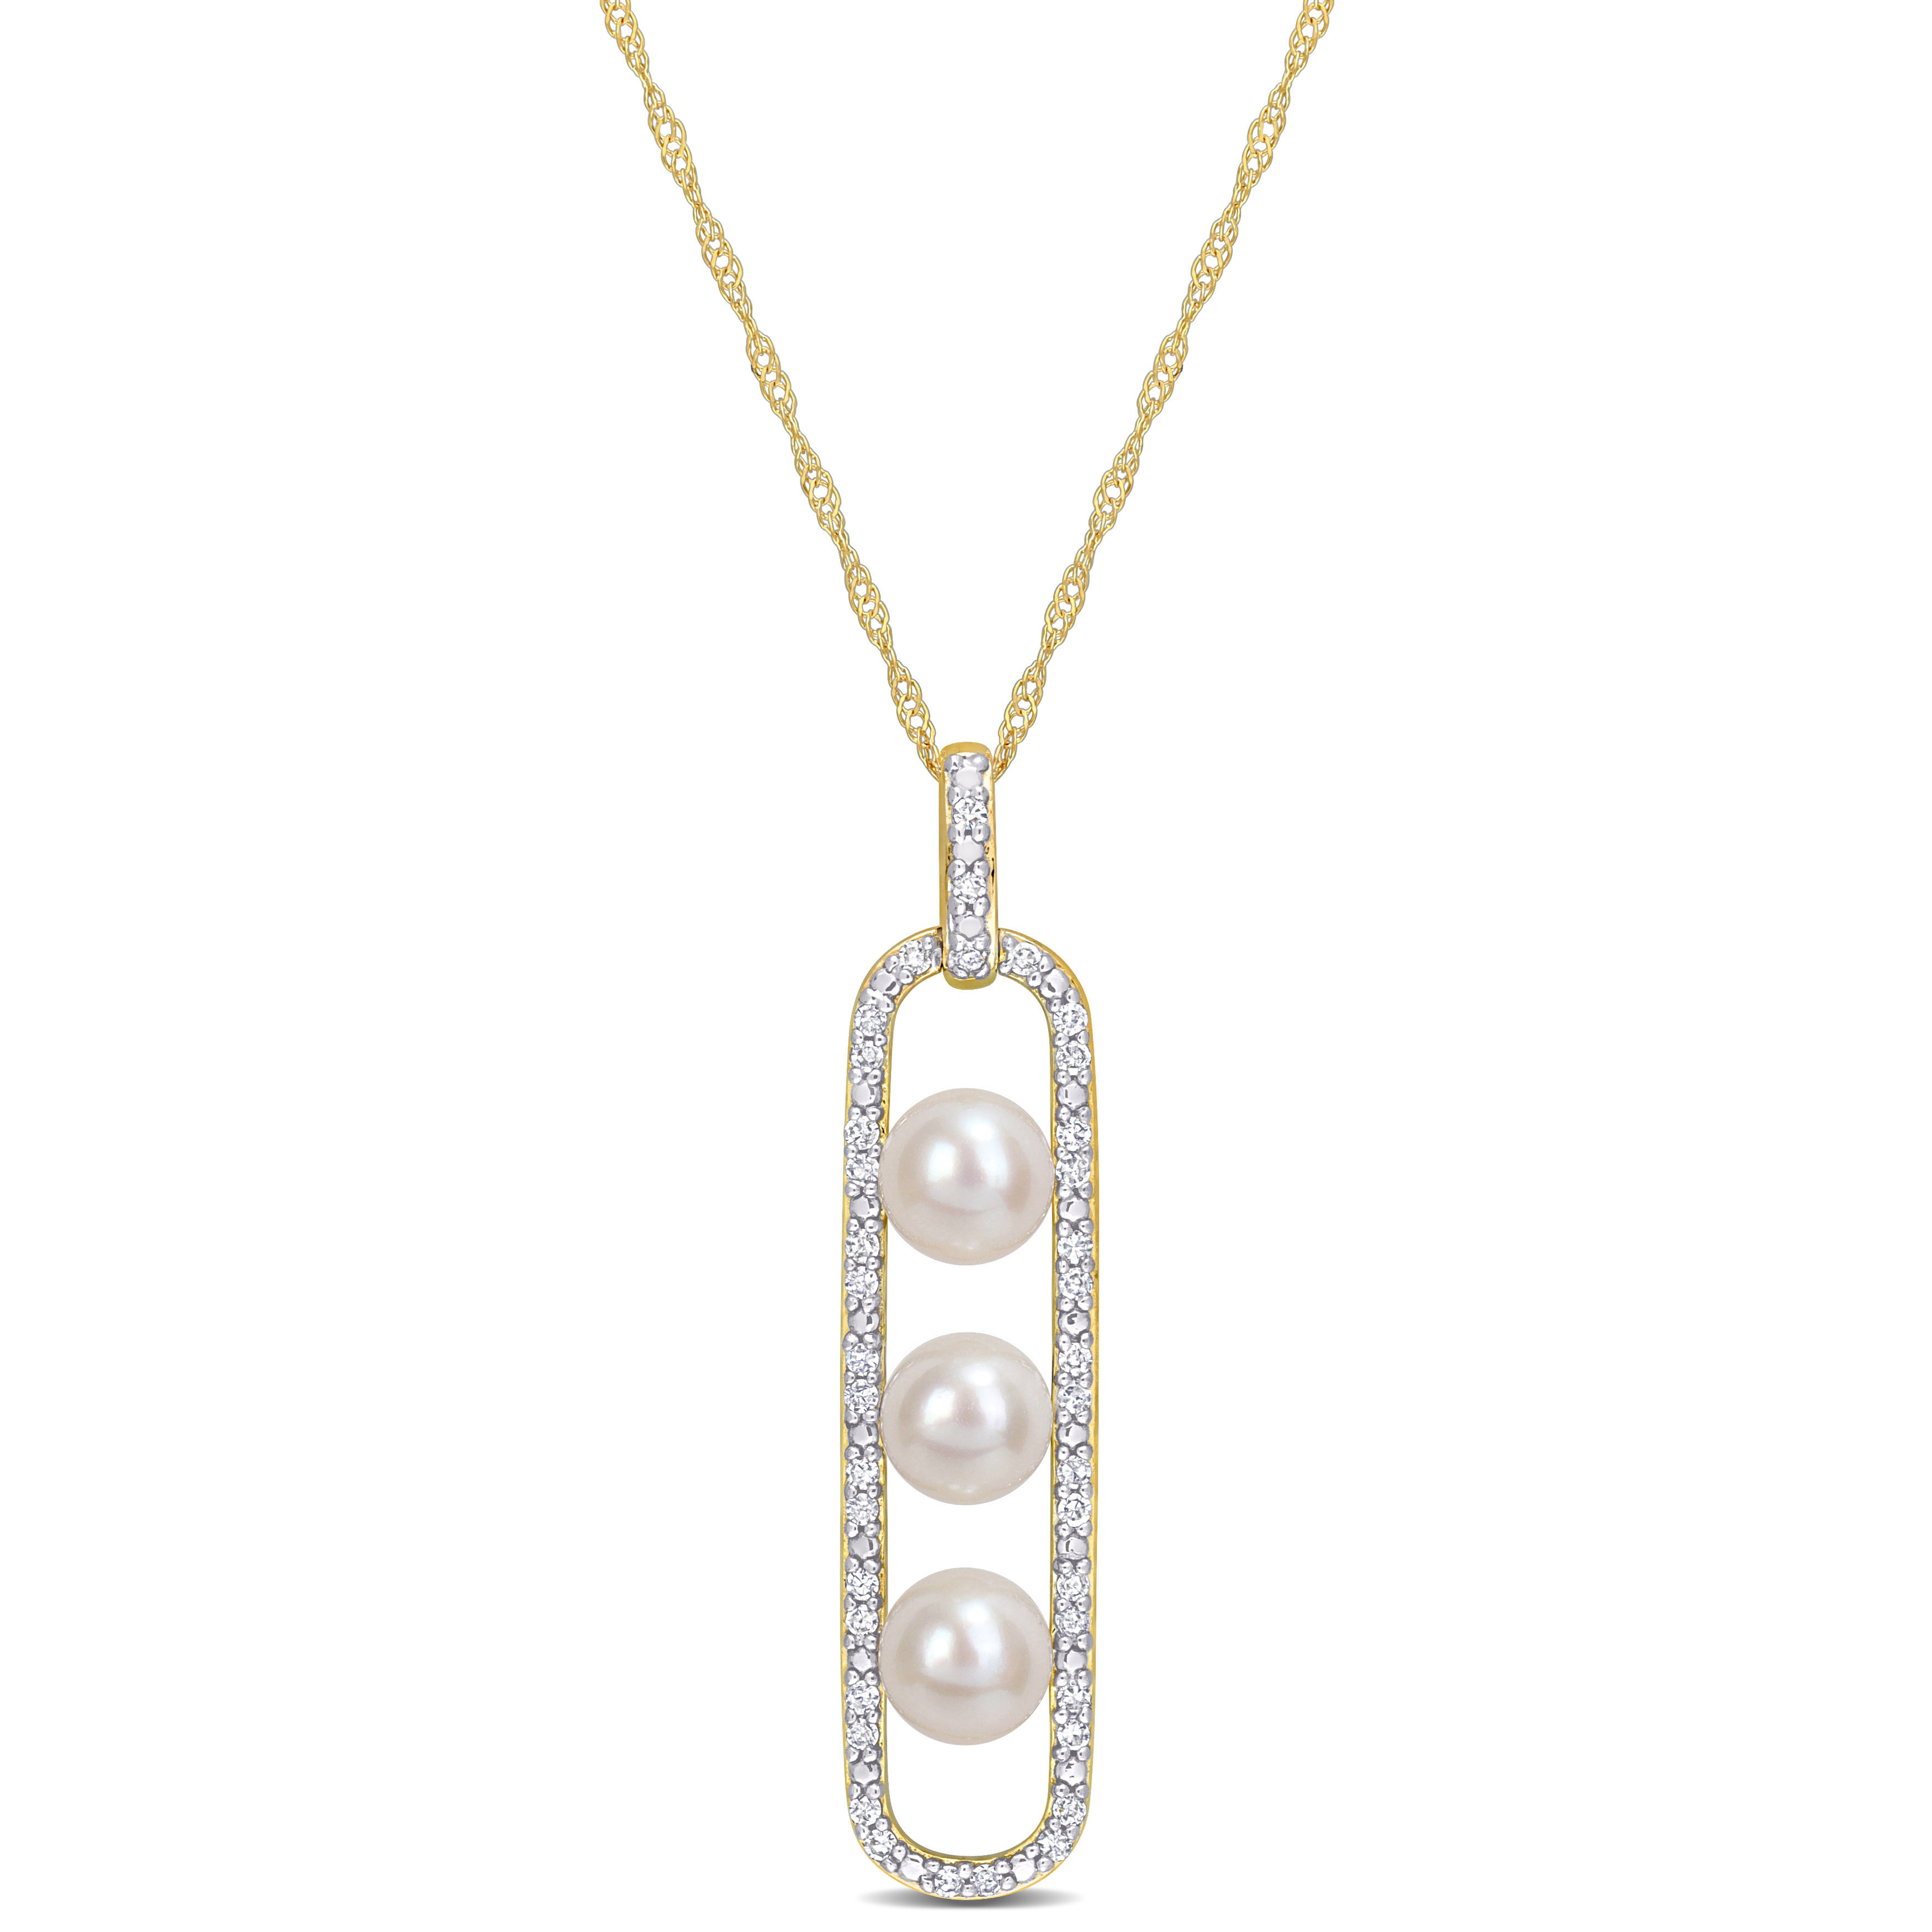 5-5.5 MM Cultured Freshwater Pearl and 1/5 CT TDW Diamond Drop Pendant with Chain in 10k Yellow Gold - 17 in.